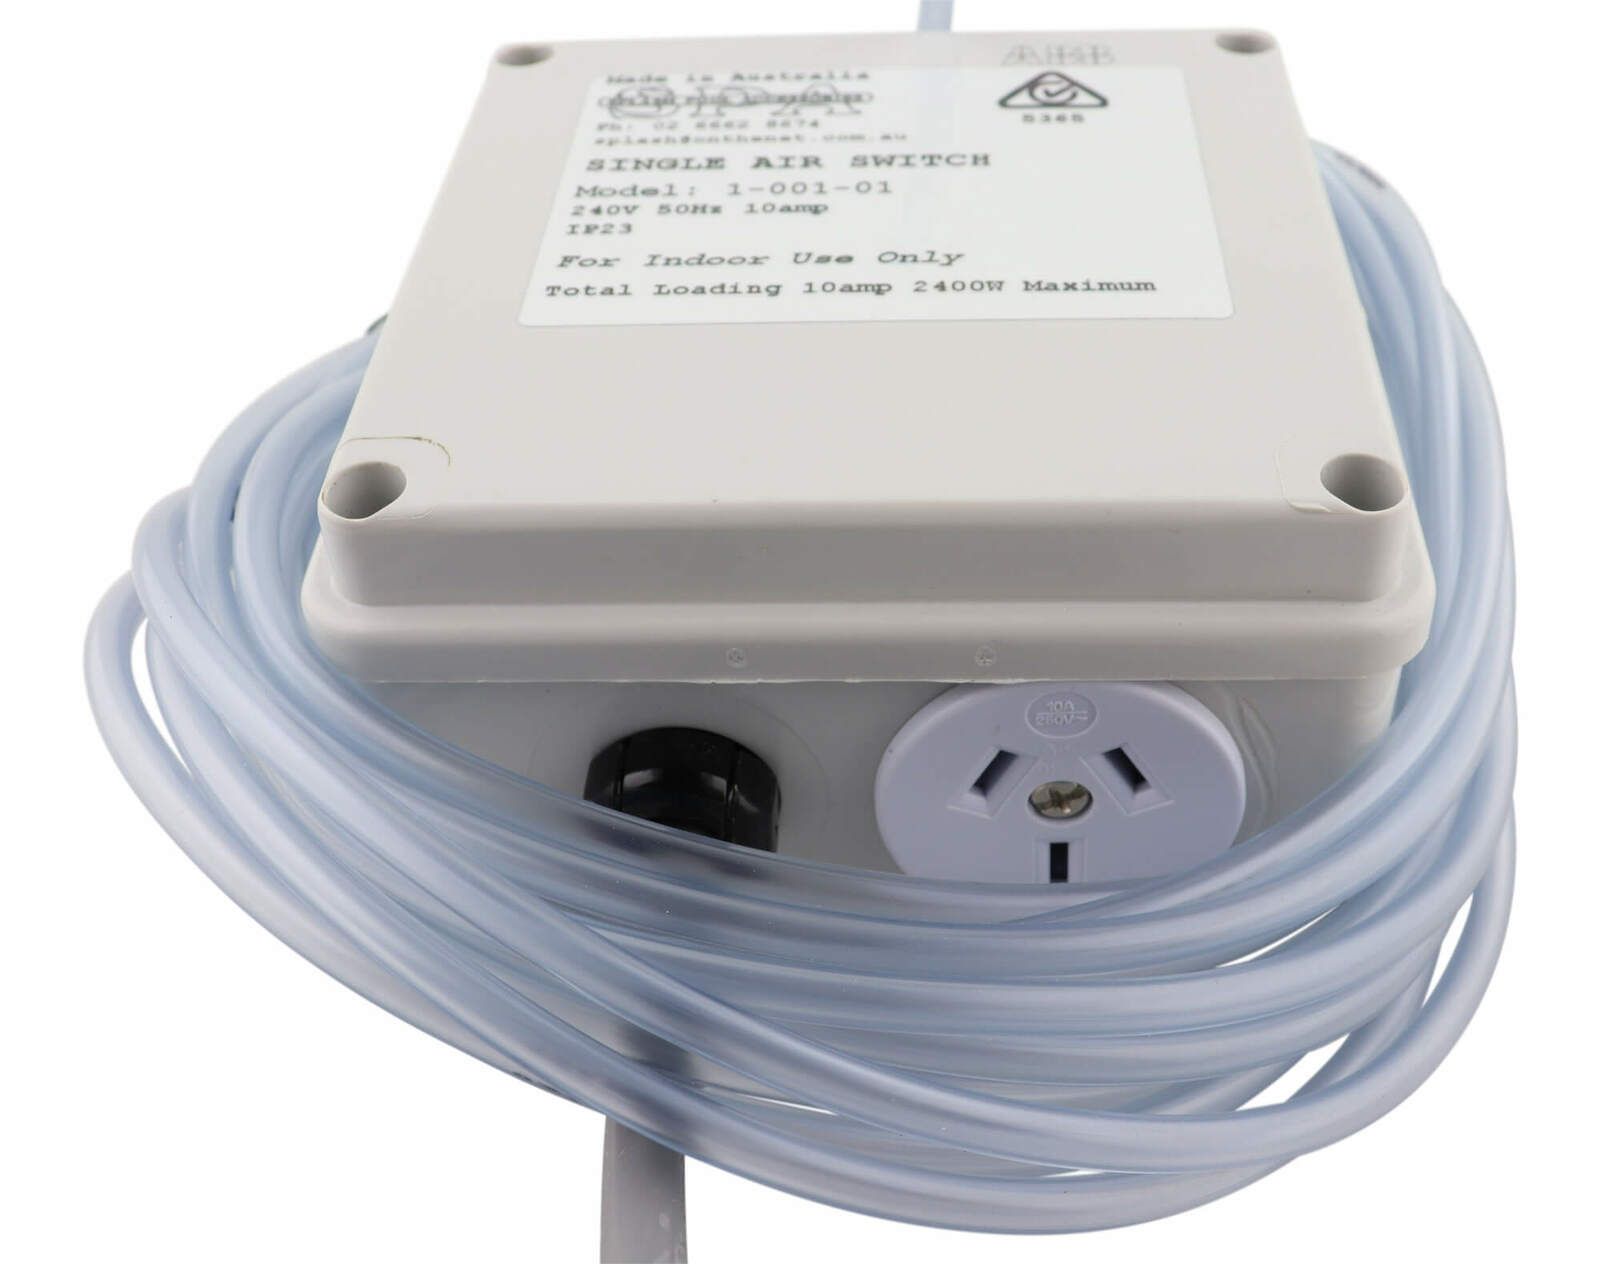 Details about   Air Switch Single 10amp Plug Electronic Controller Splash Pool & Spa 